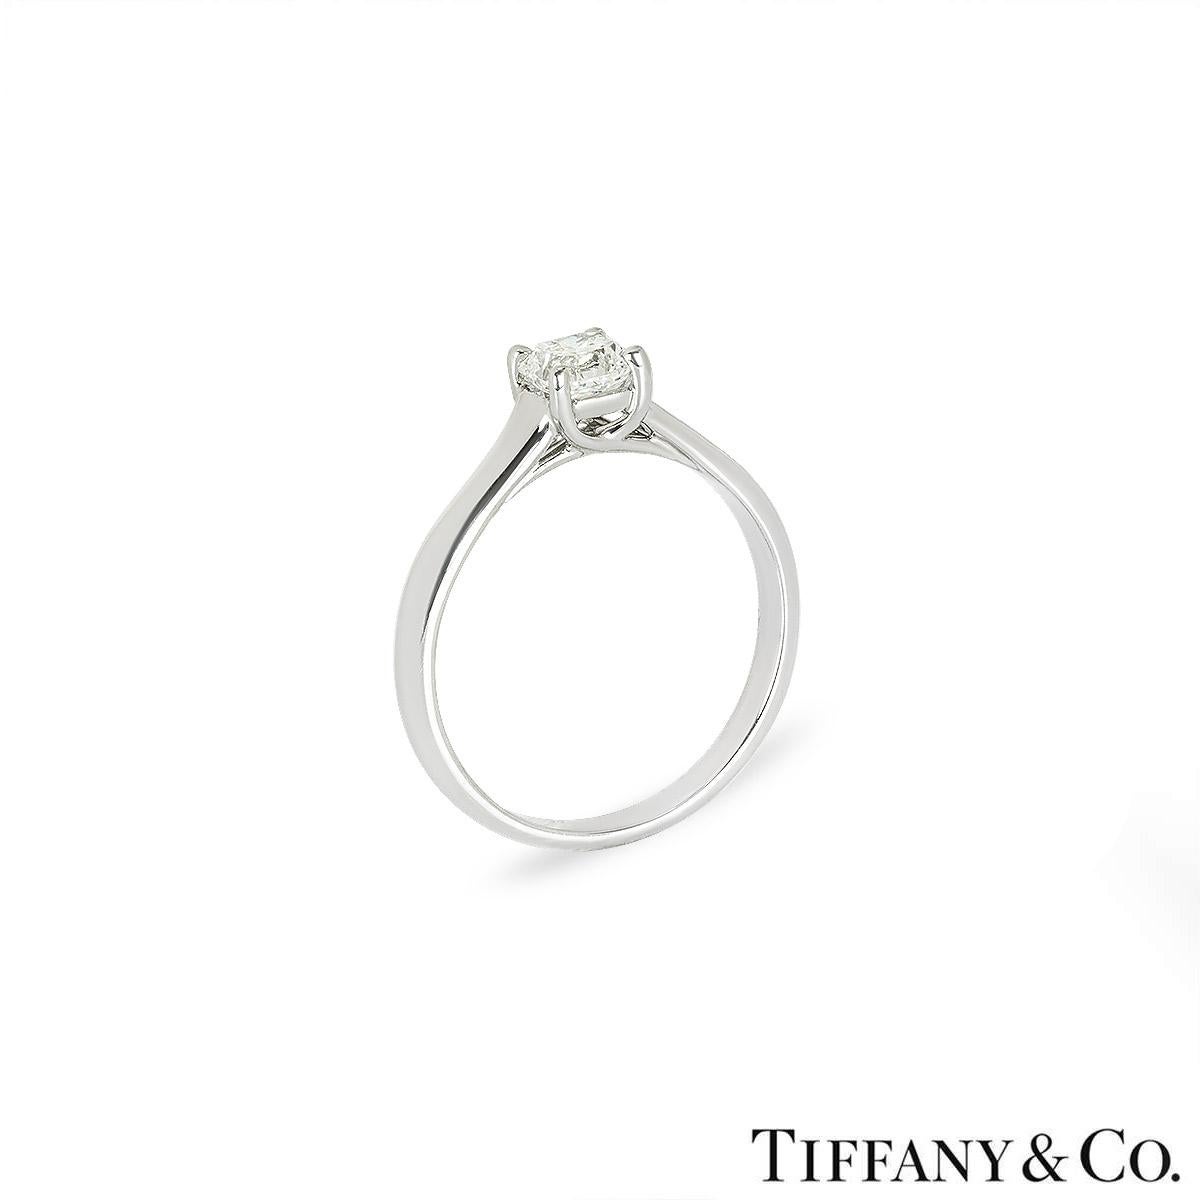 A lovely platinum Tiffany & Co. diamond ring from the Lucida collection. The solitaire ring comprises of a Lucida cut diamond in a 4 claw setting with a weight of 0.66ct, H colour and VVS1 clarity. The ring tapers down from 3.45mm wide to 2.33mm,